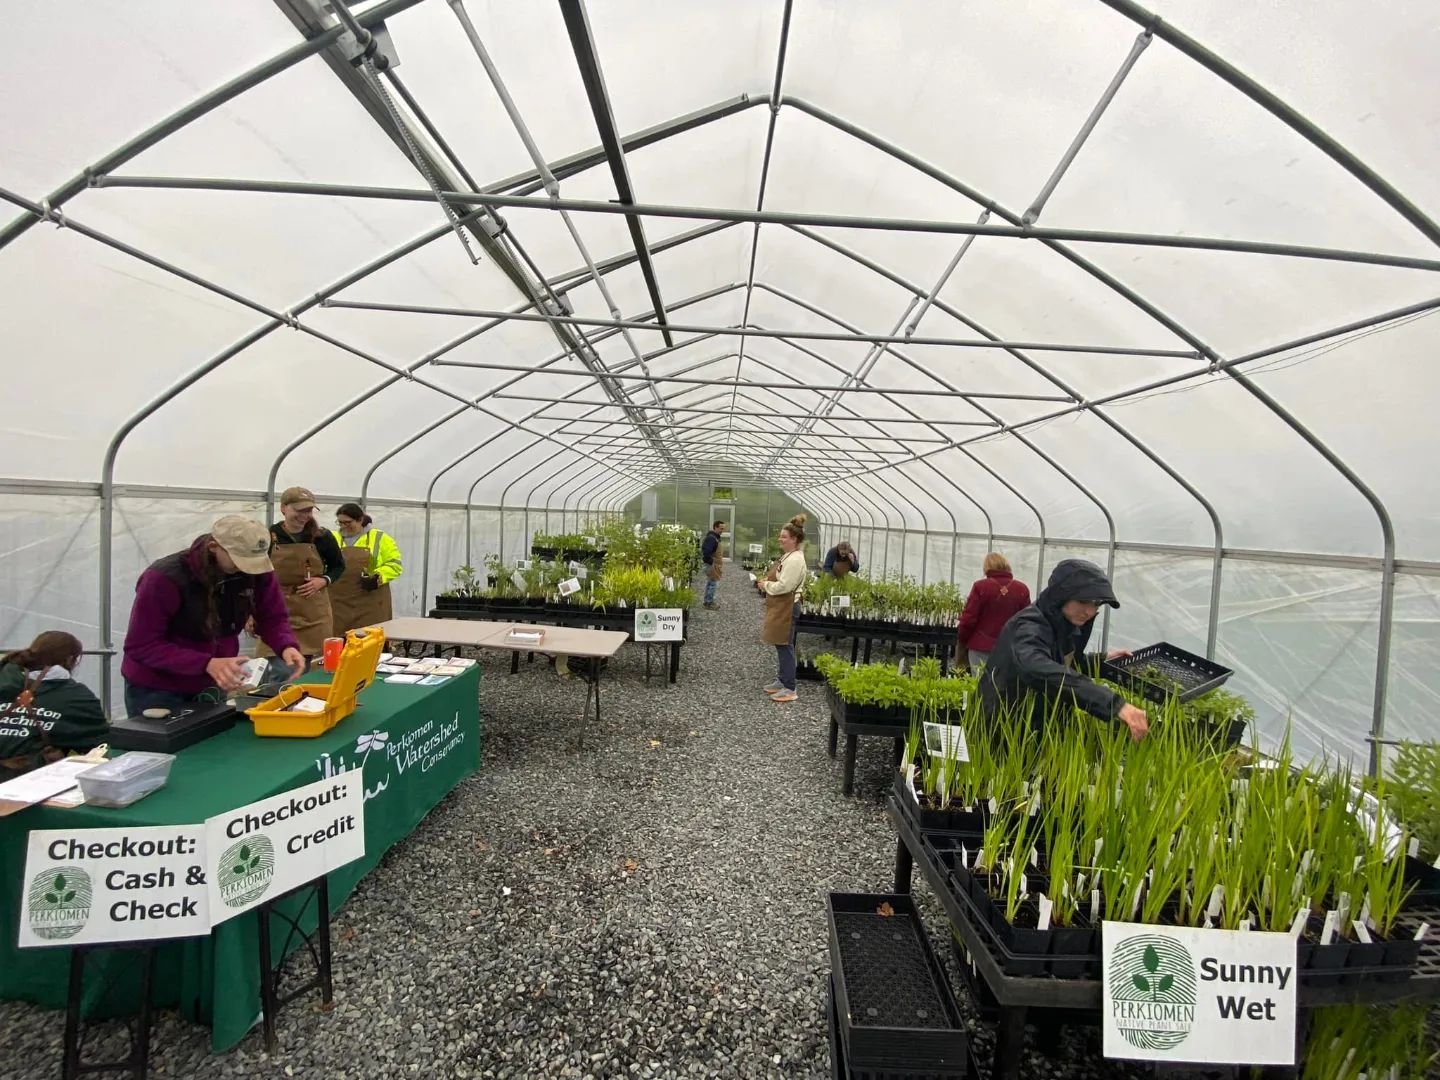 It may be raining&hellip; but our sale is under cover&hellip; come on out to the Native Plant Sale at Reiff Park! We&rsquo;re here from 9 am to 1 pm.
Learn more about the Native Plant Sale at www.perkiomenwatershed.org/native-plant-sale